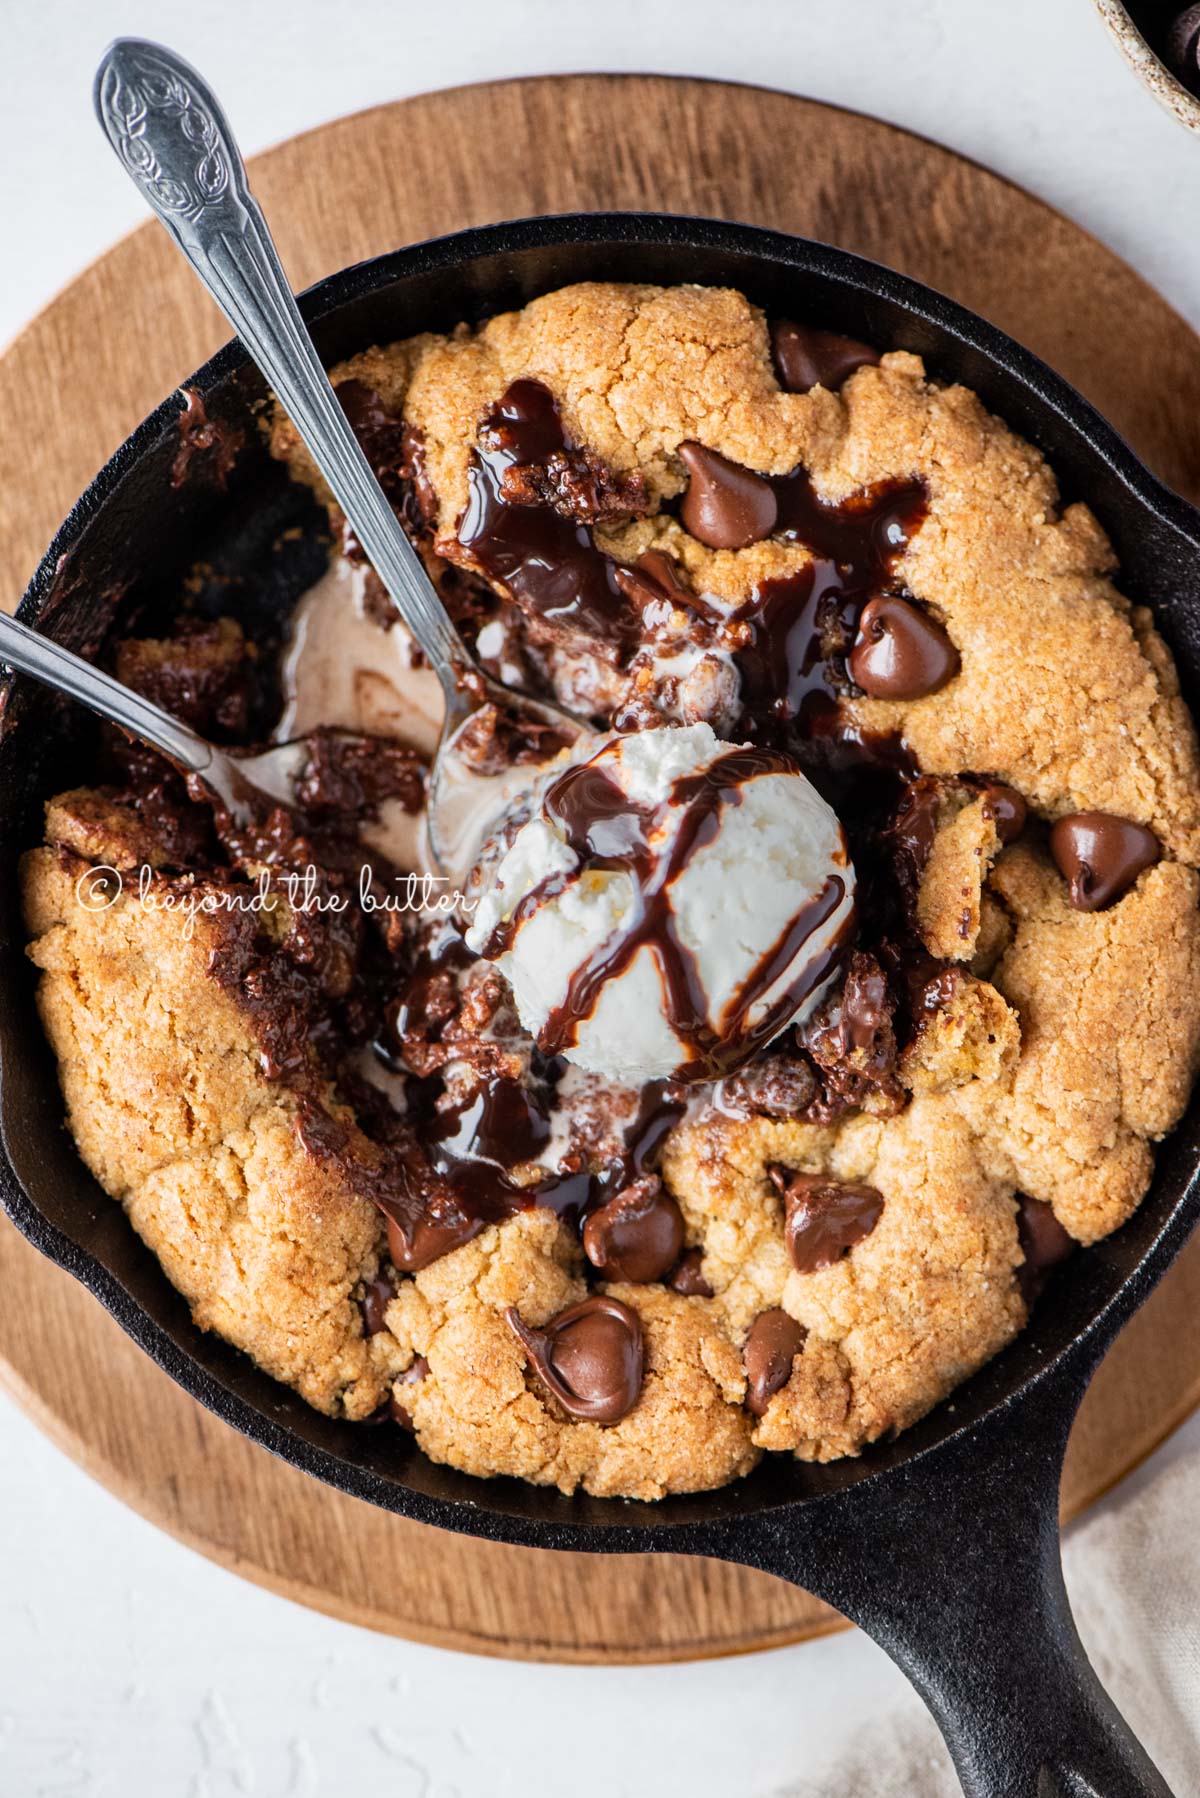 Closeup of brown butter chocolate chip skillet cookie with scoop of vanilla ice cream and two spoons resting in skillet on wood trivet | All Images © Beyond the Butter®